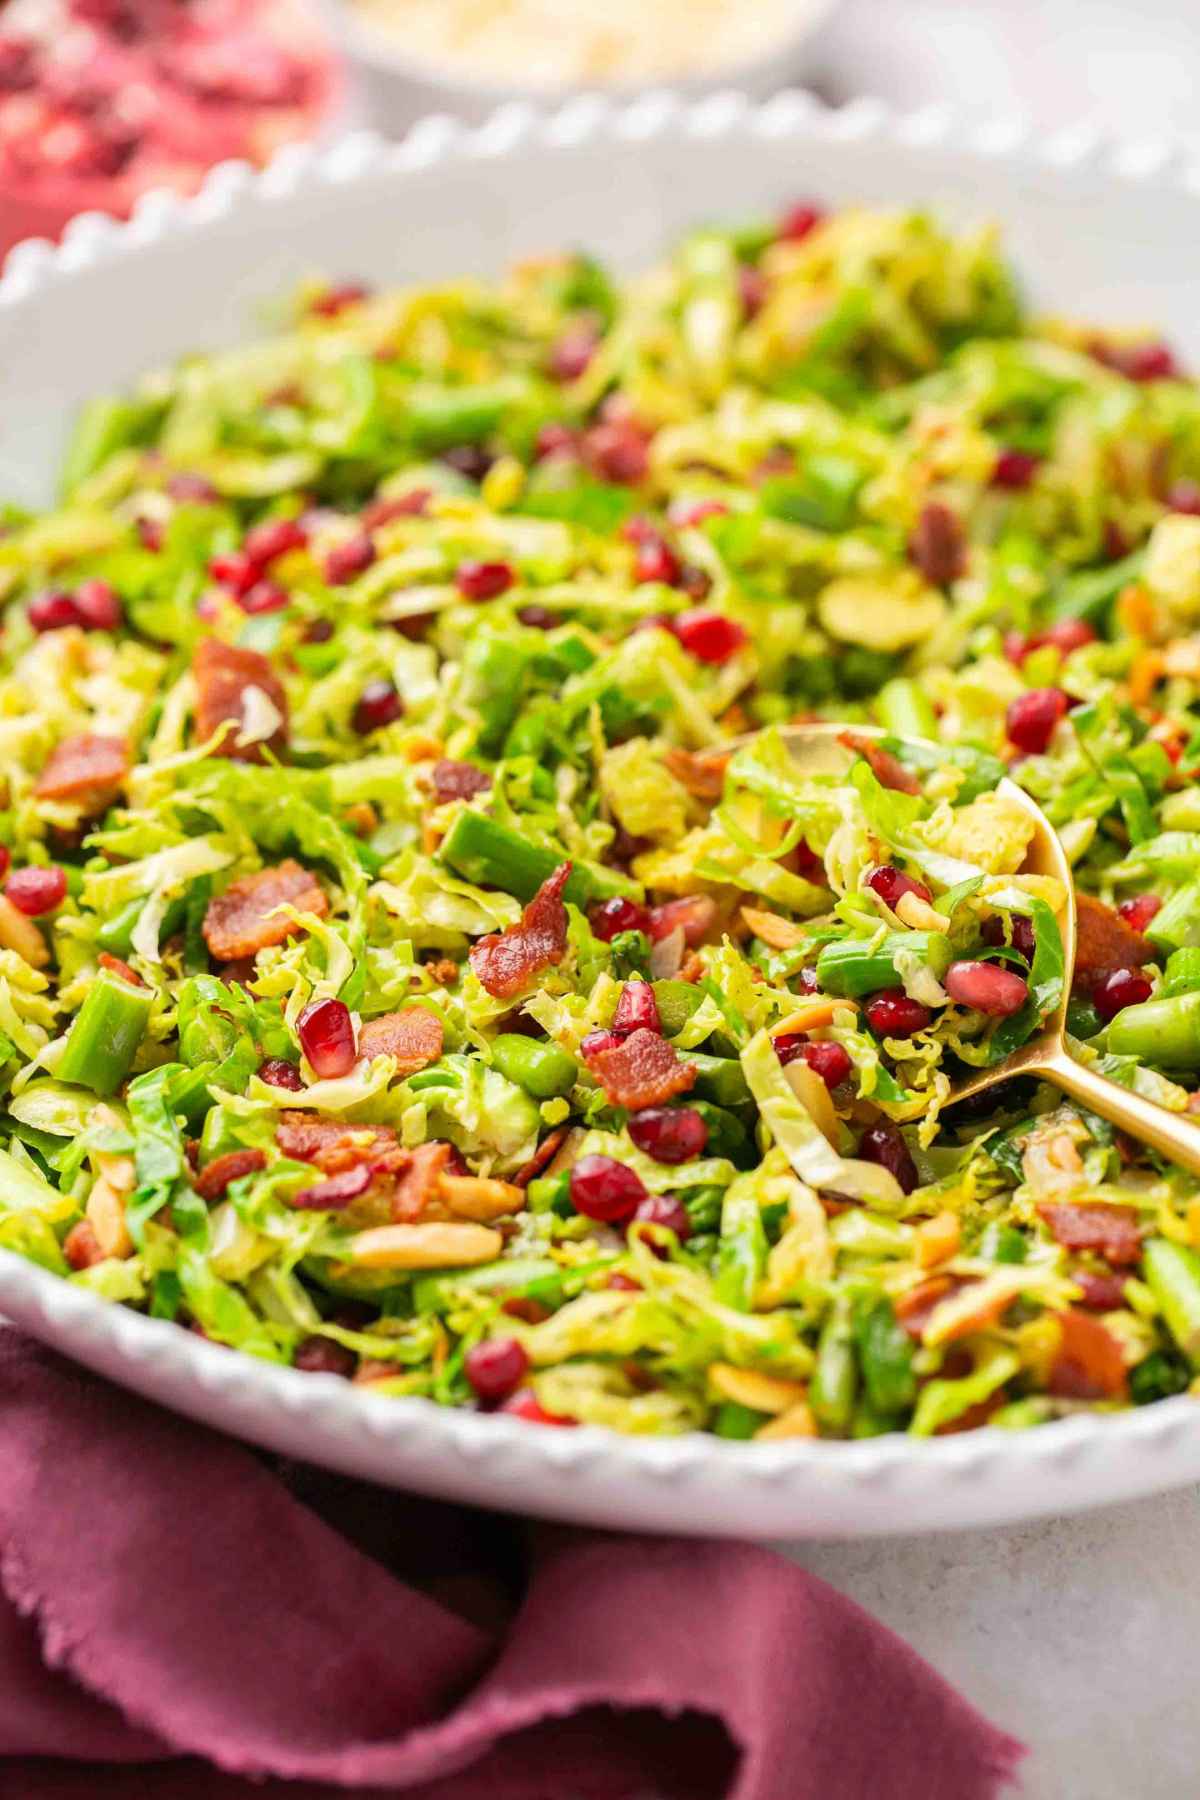 Shredded brussels sprouts salad served in a white serving bowl.